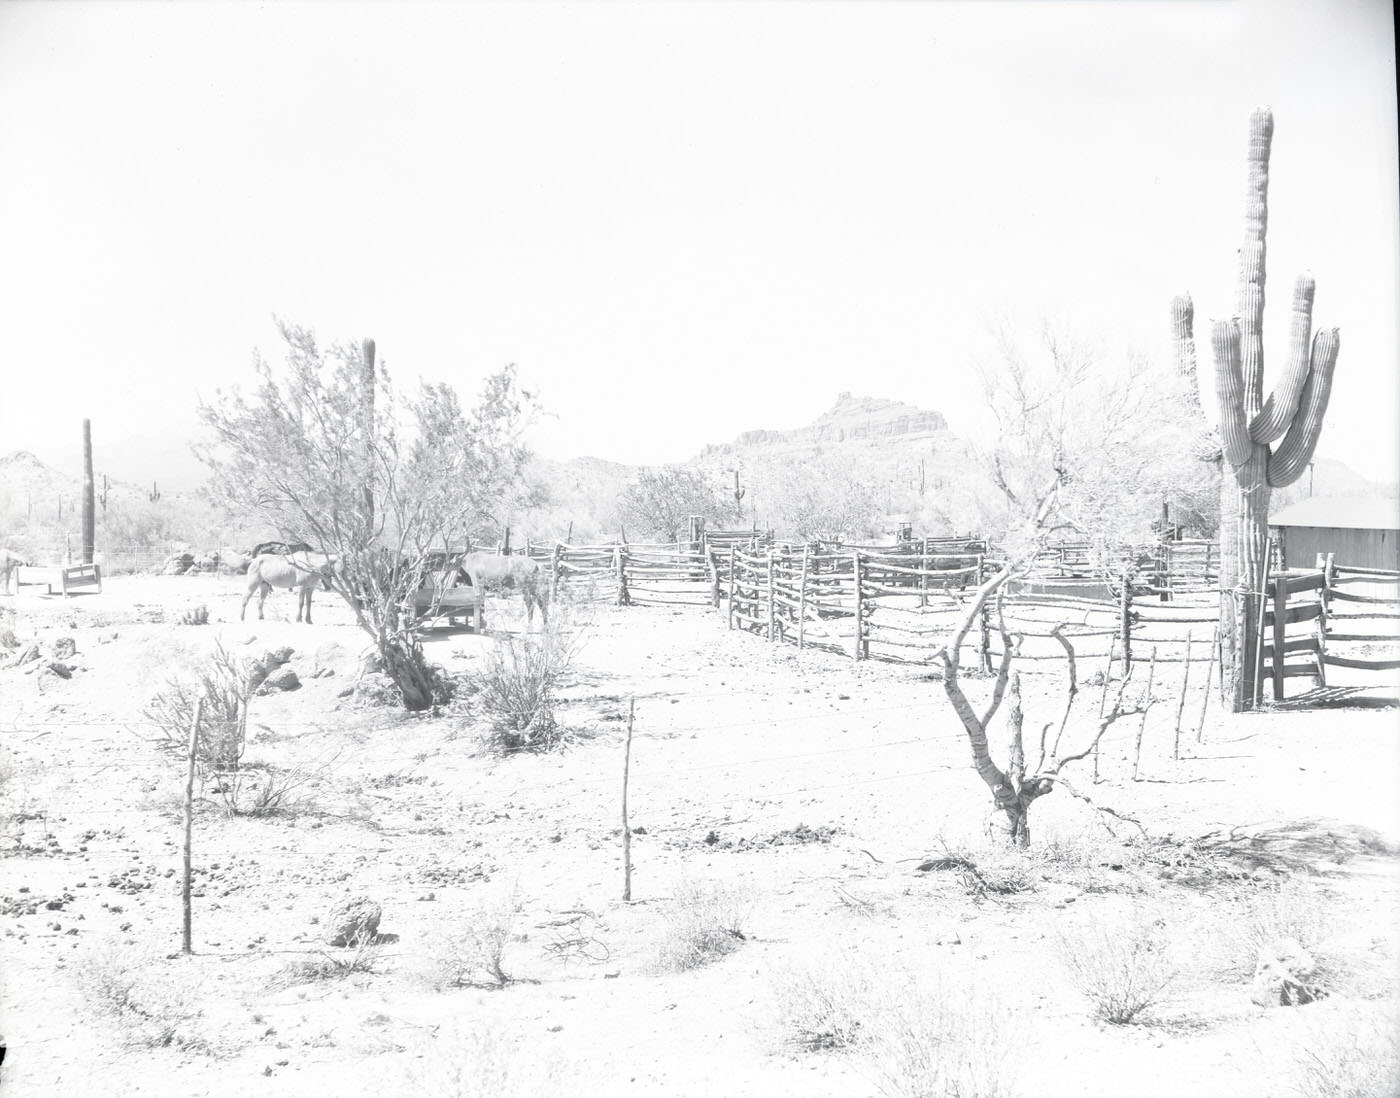 Red Mountain Ranch Grounds, 1946. This ranch was located on Bush Highway in Mesa, Arizona.